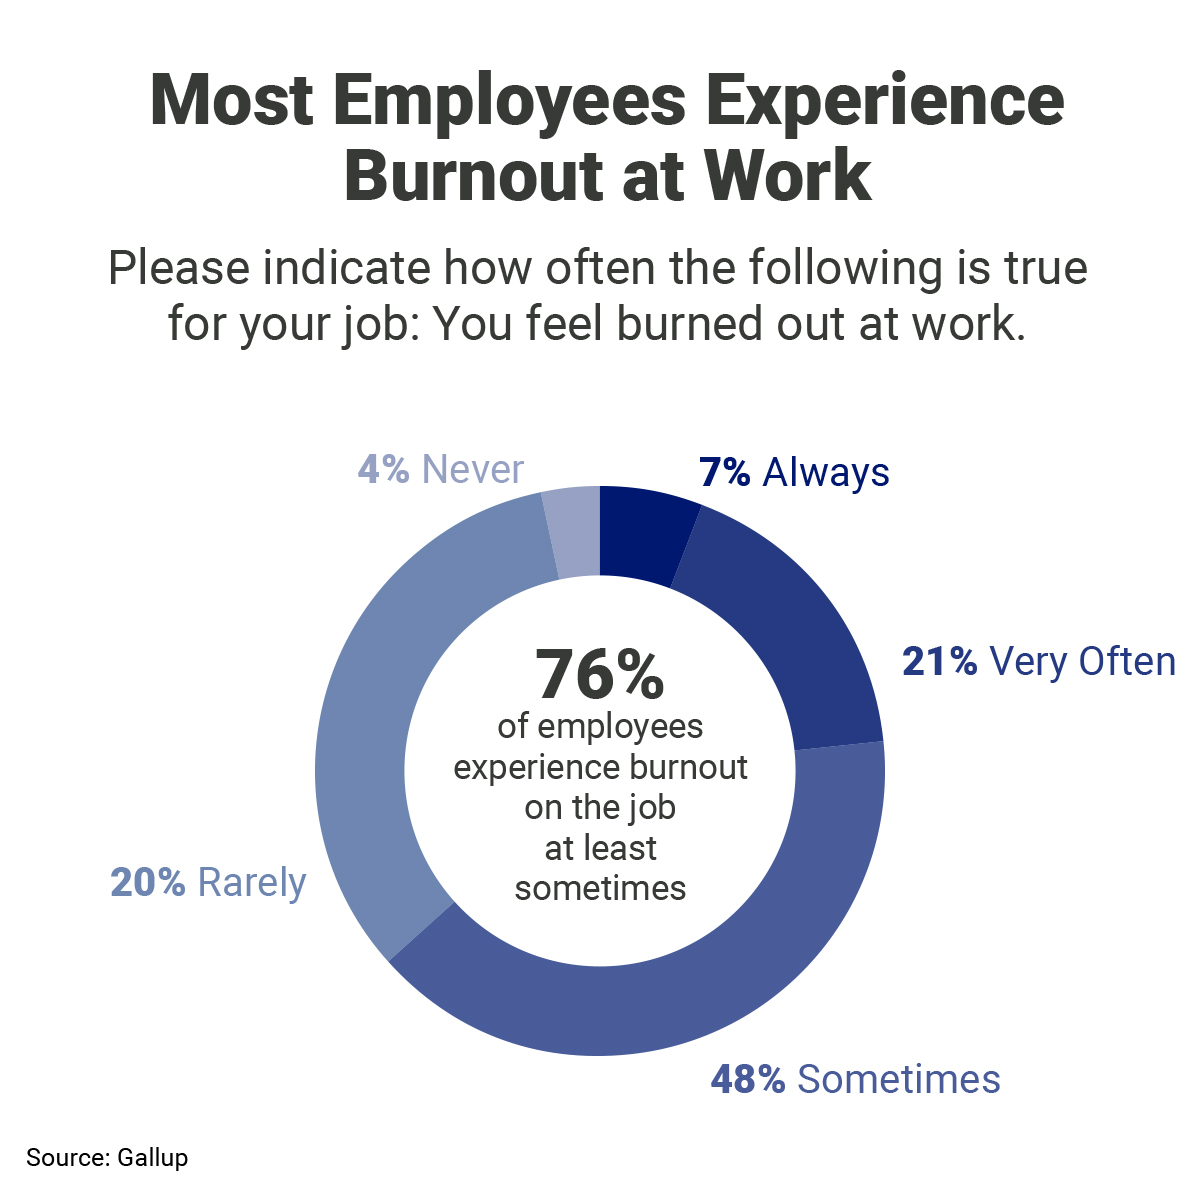 Pie chart showing that 76% of employees experience burnout